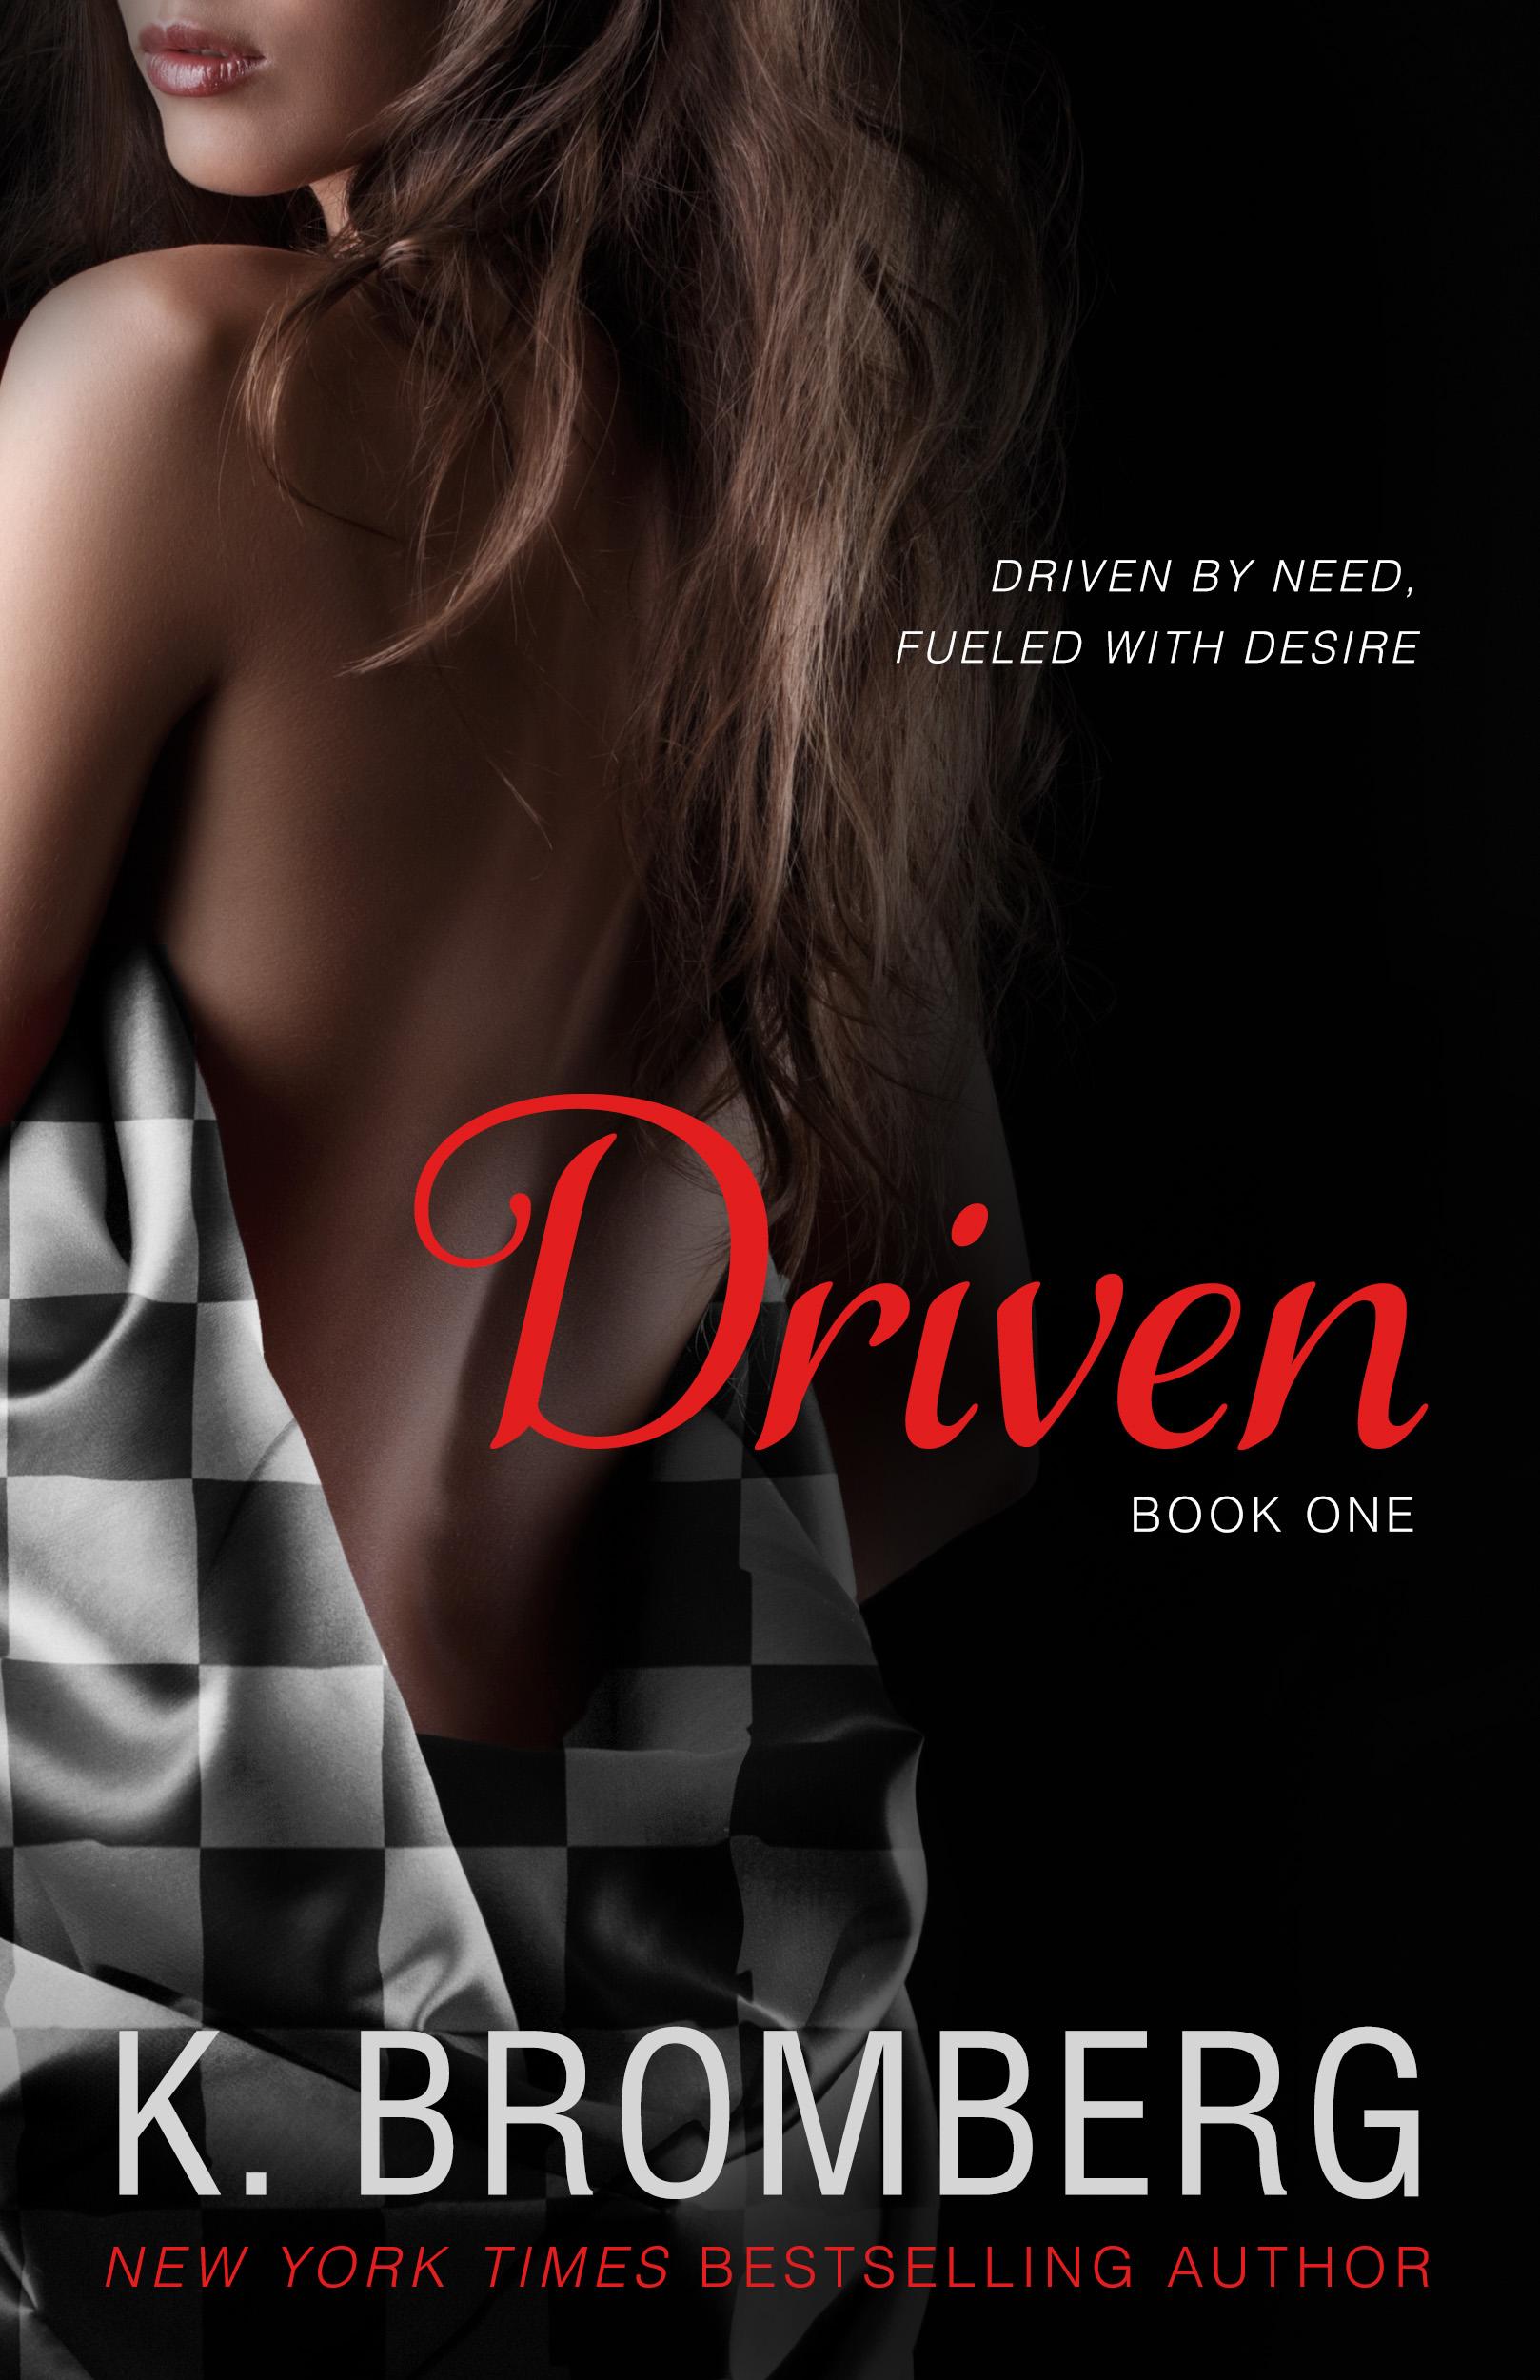 Book Cover for "Driven" by K. Bromberg